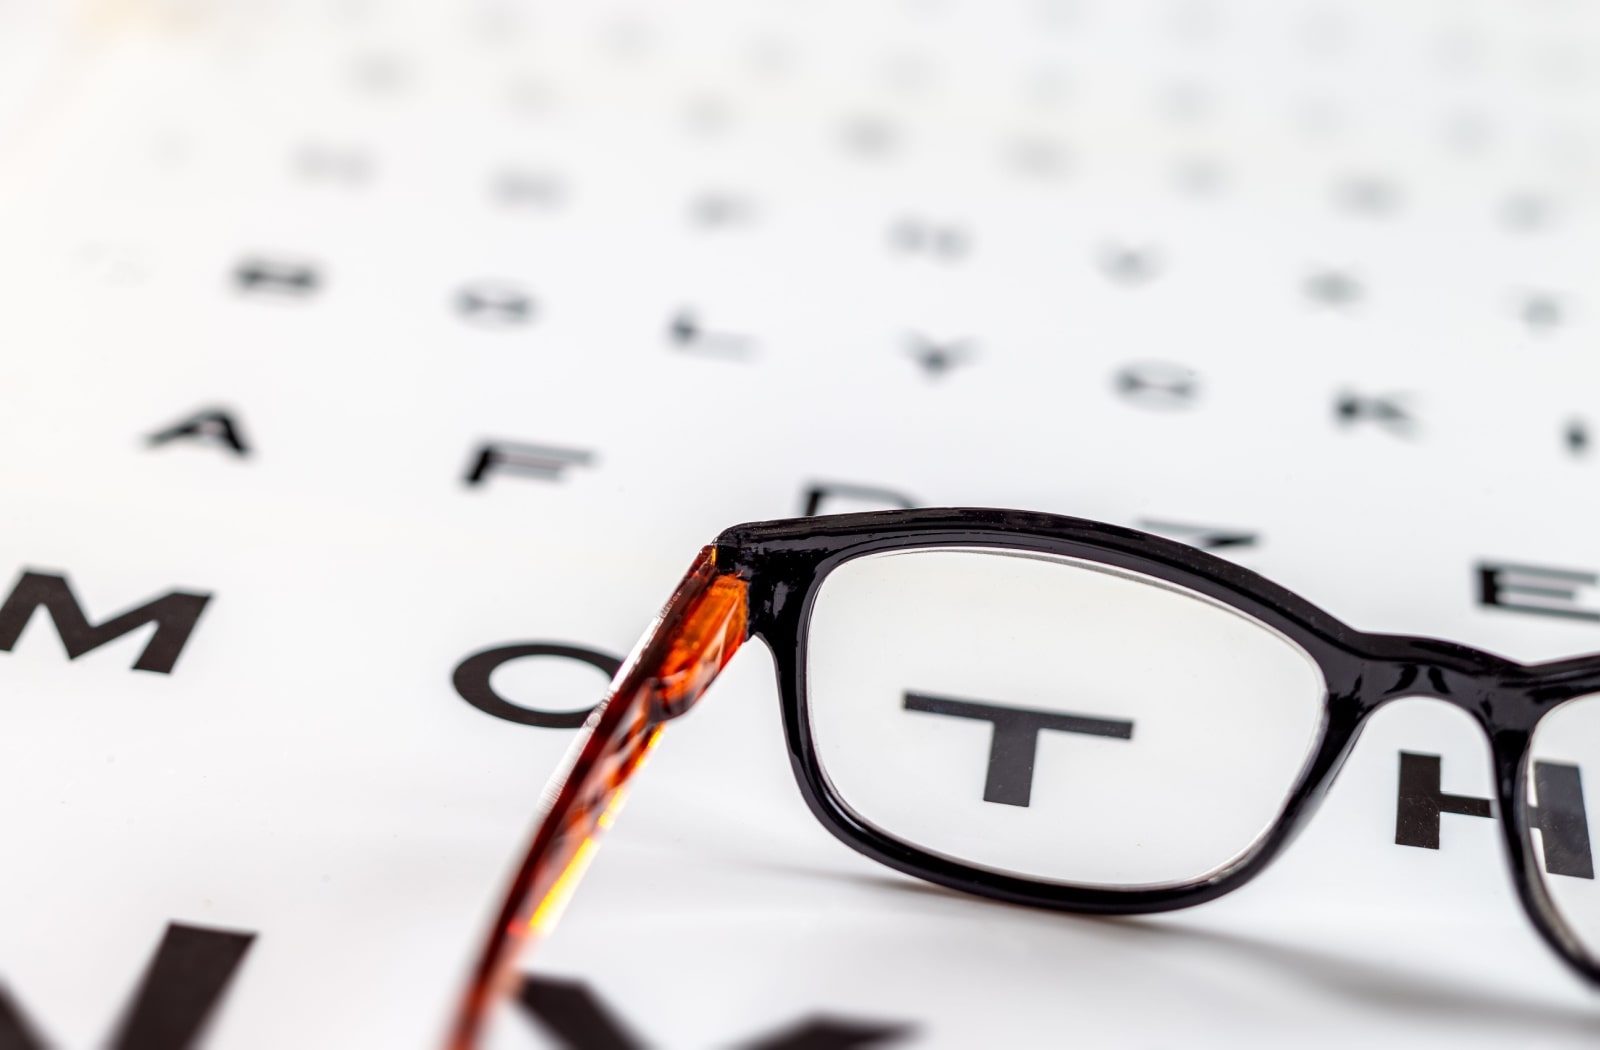 A pair of glasses sitting on a Snellen eye chart